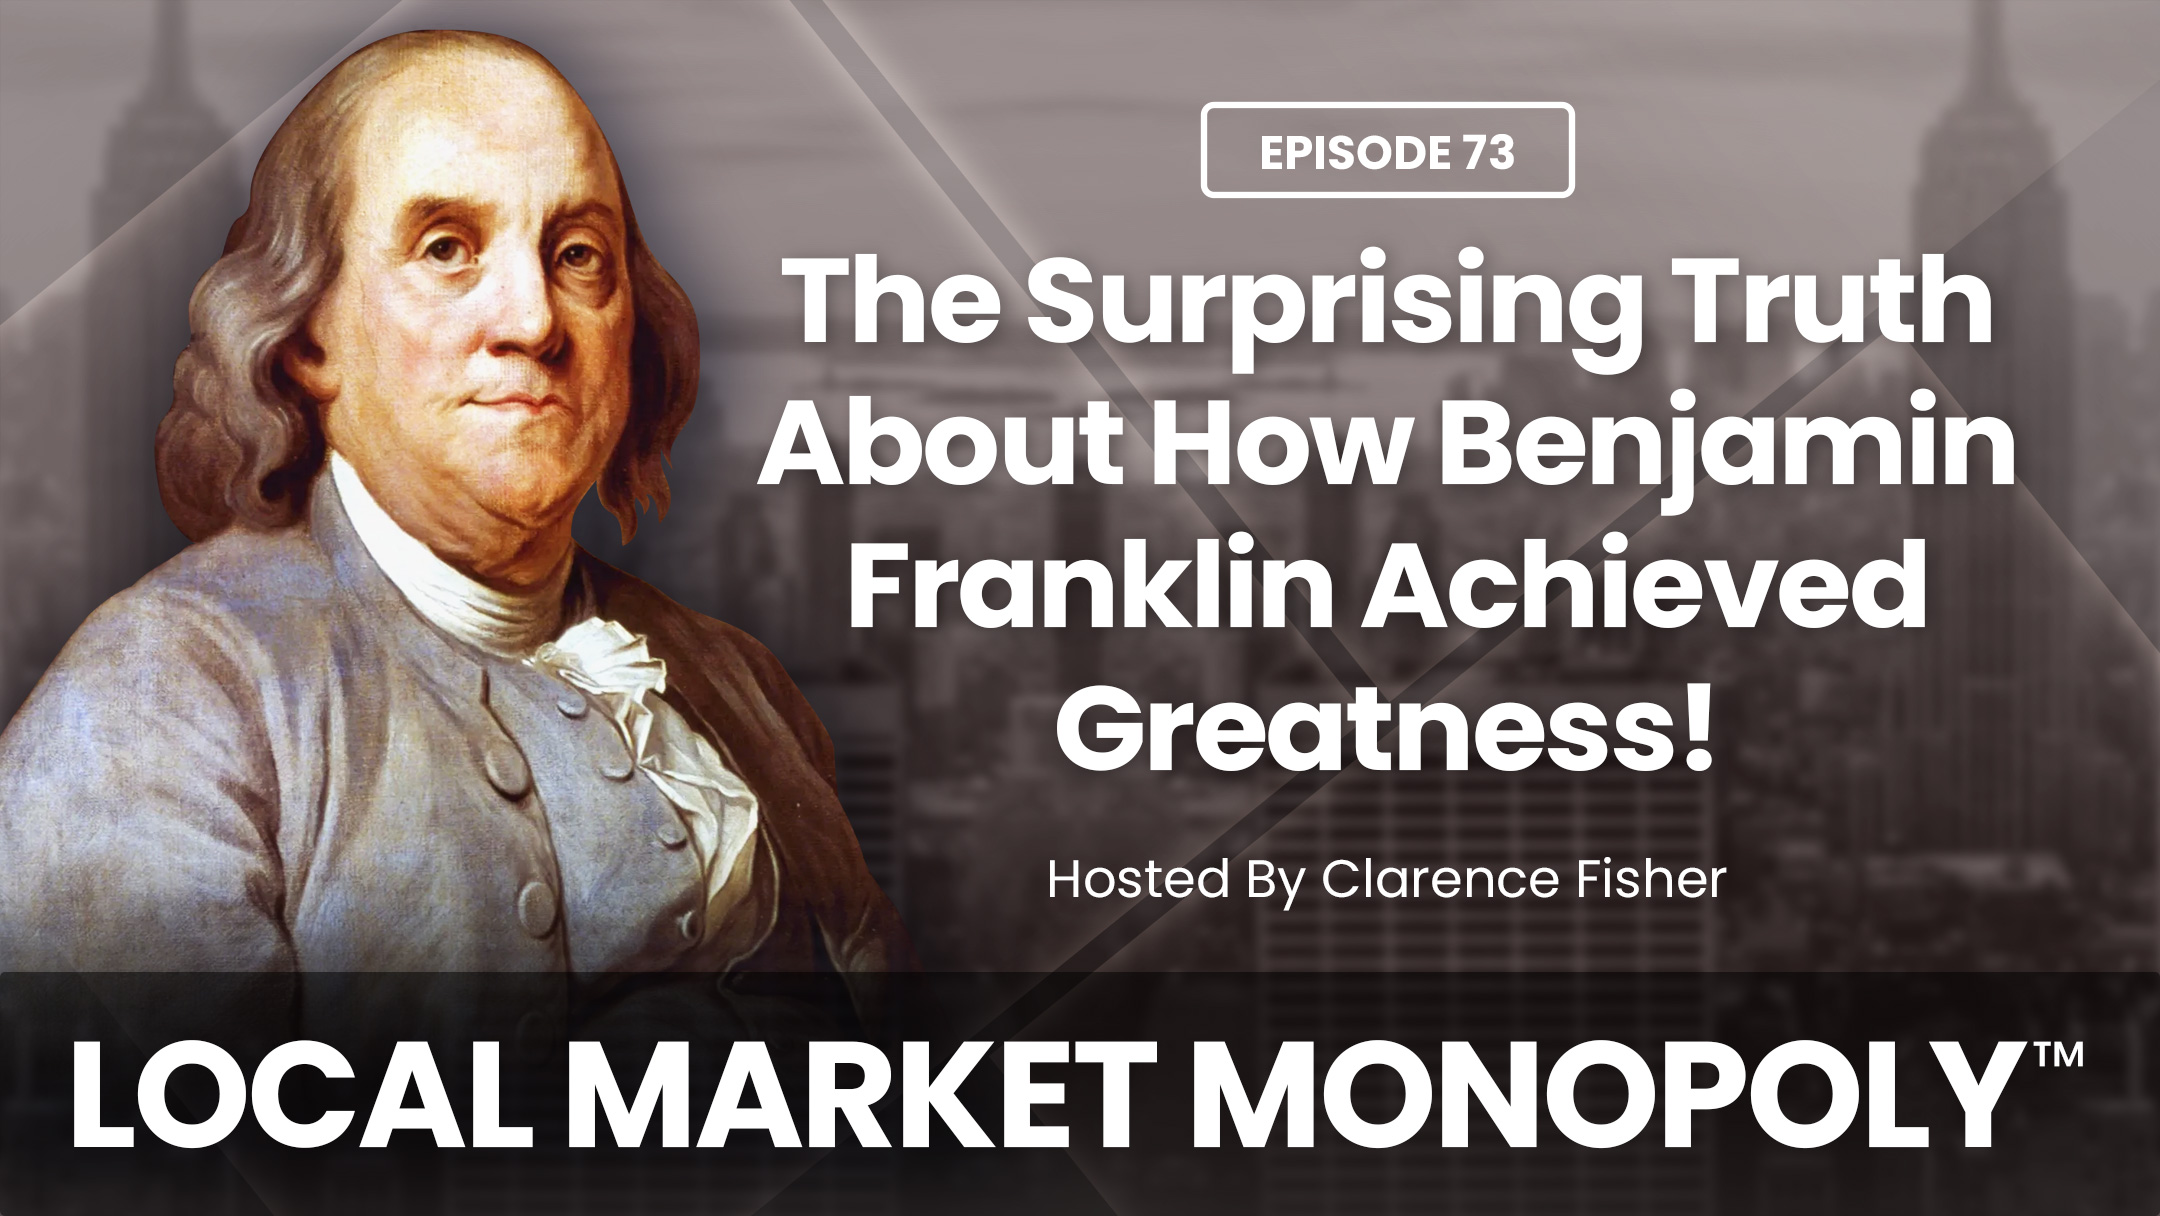 The Surprising Truth About How Benjamin Franklin Achieved Greatness!